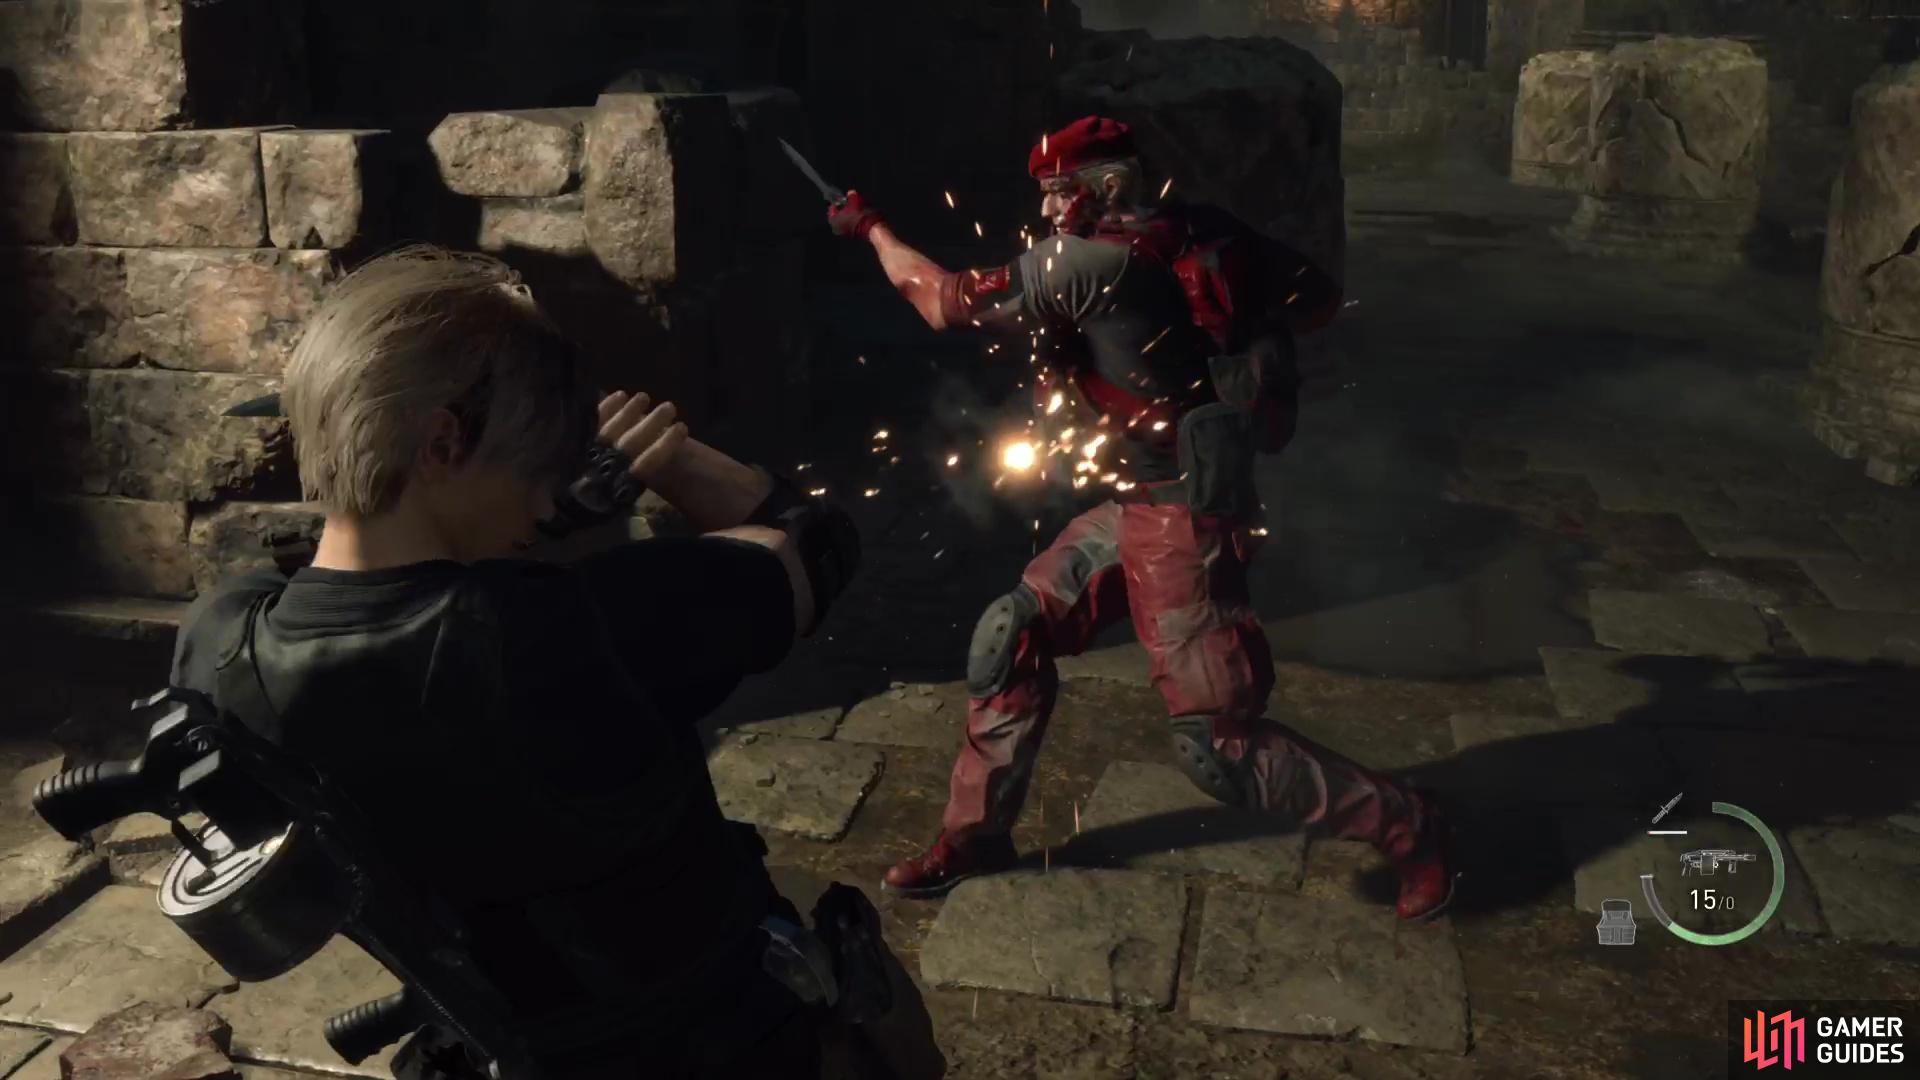 Resident Evil 4 Remake Includes the Krauser Knife Fight, Which Inspired the  New Parry System